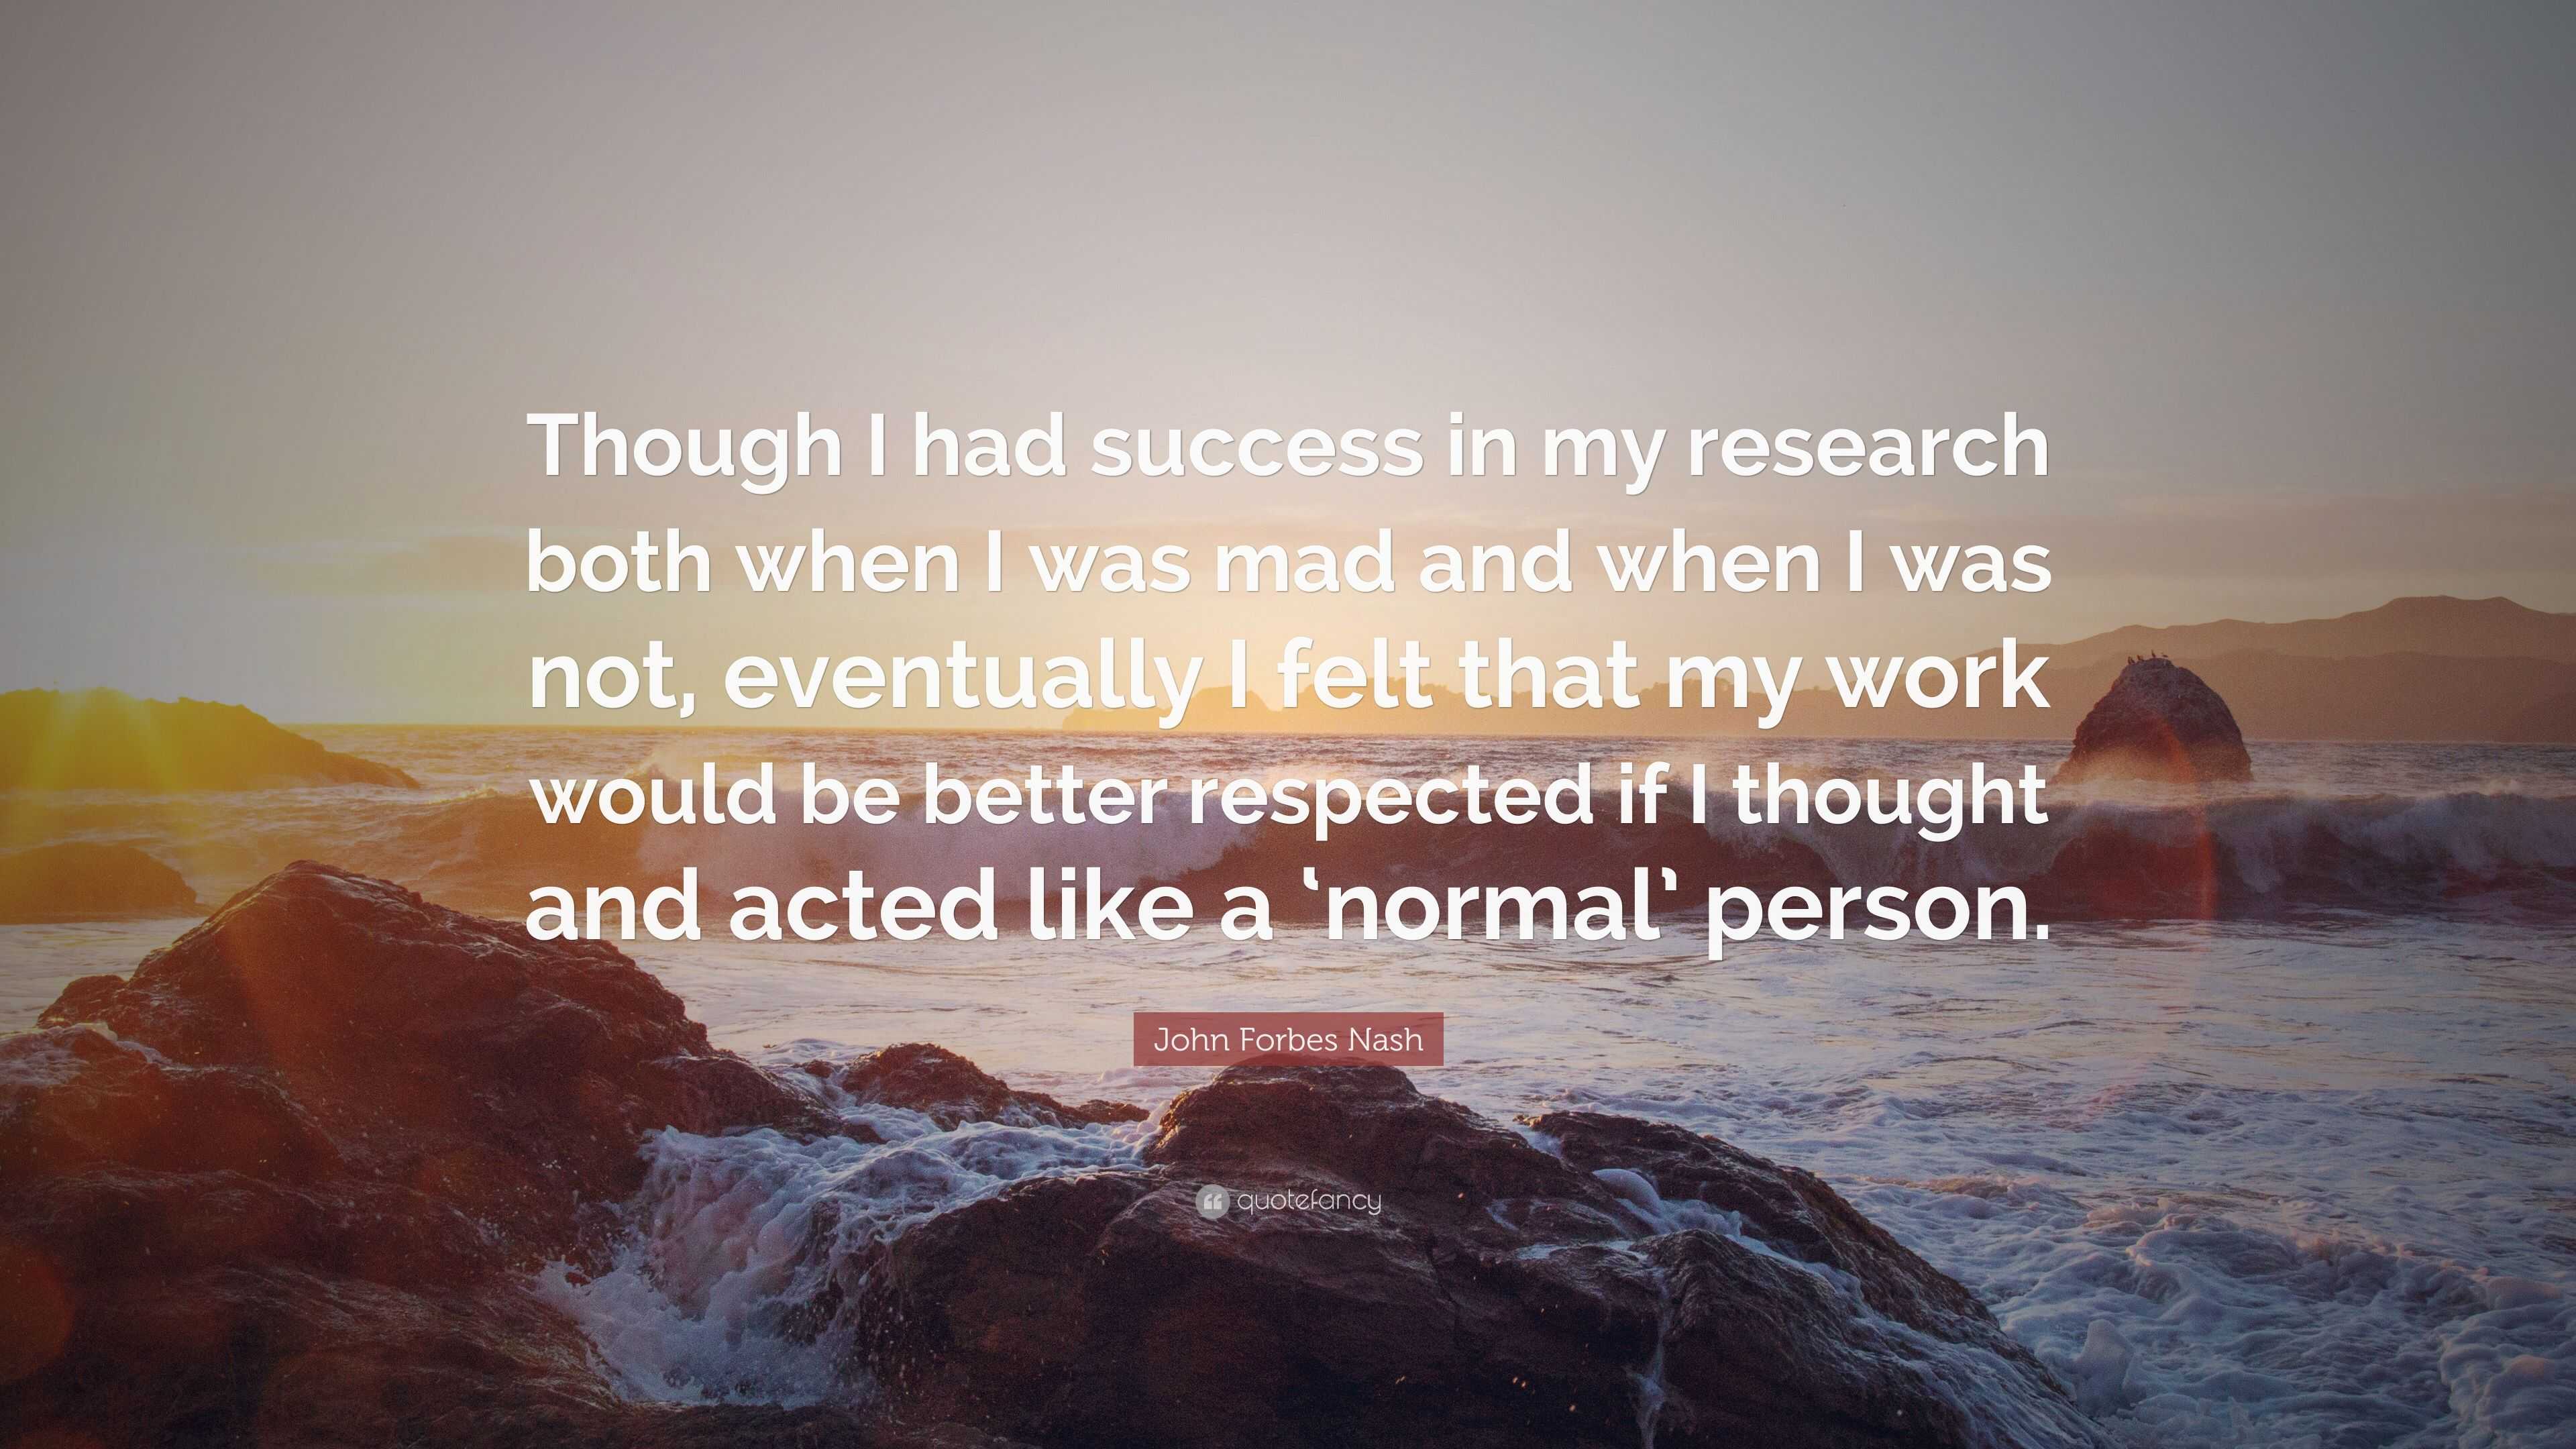 John Forbes Nash Quote: “Though I had success in my research both when